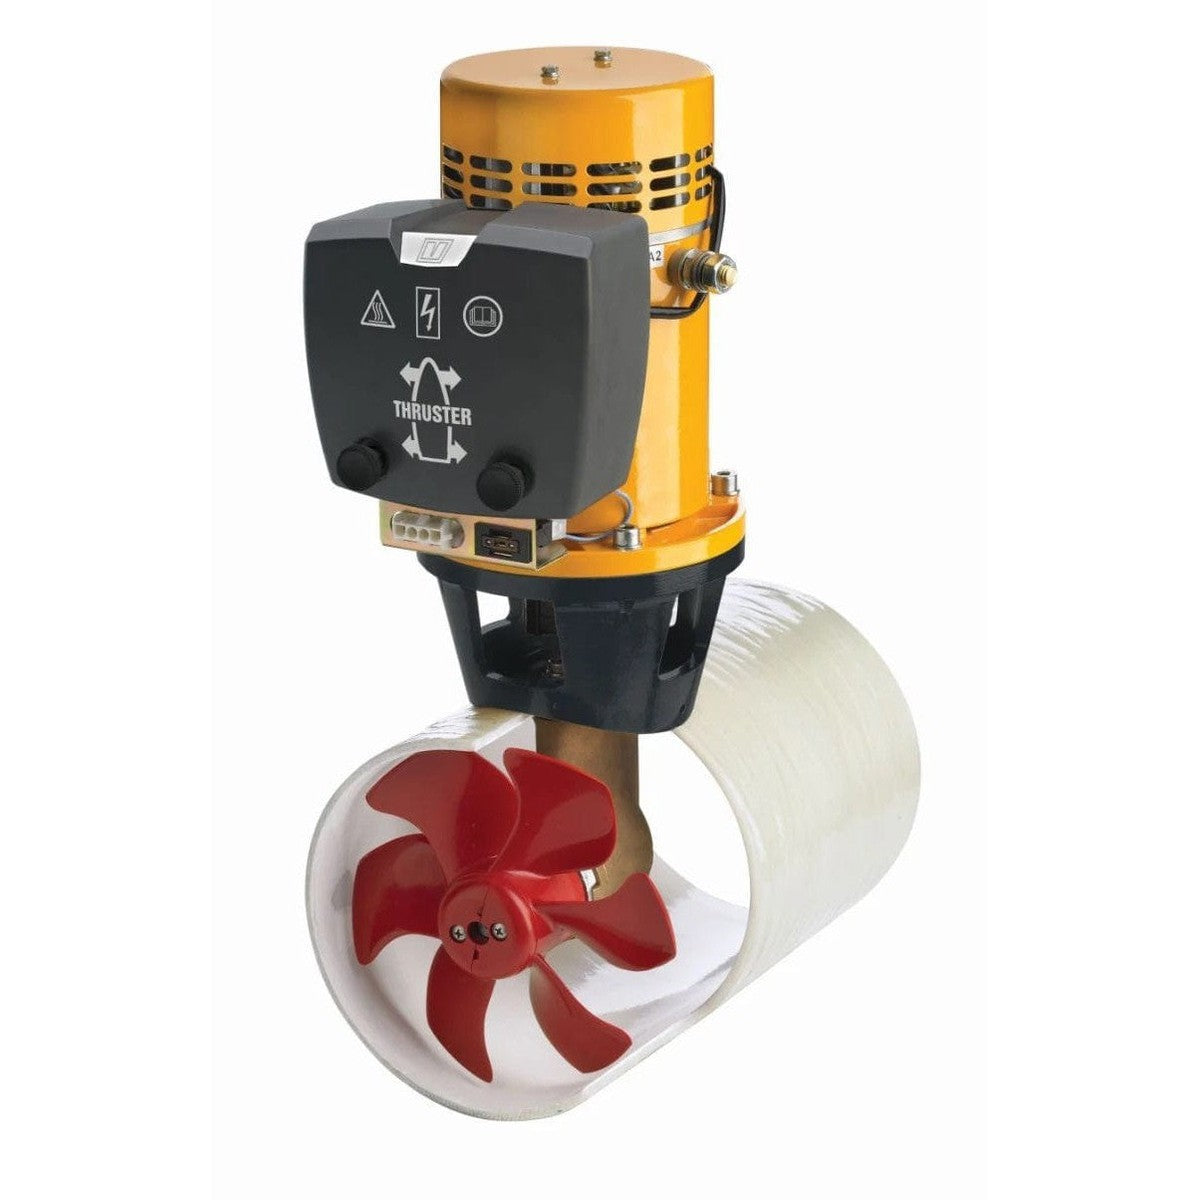 Vetus Not Qualified for Free Shipping Vetus 65 Kg Force Bow Thruster for 185 mm Tunnel 12v #BOW6012D